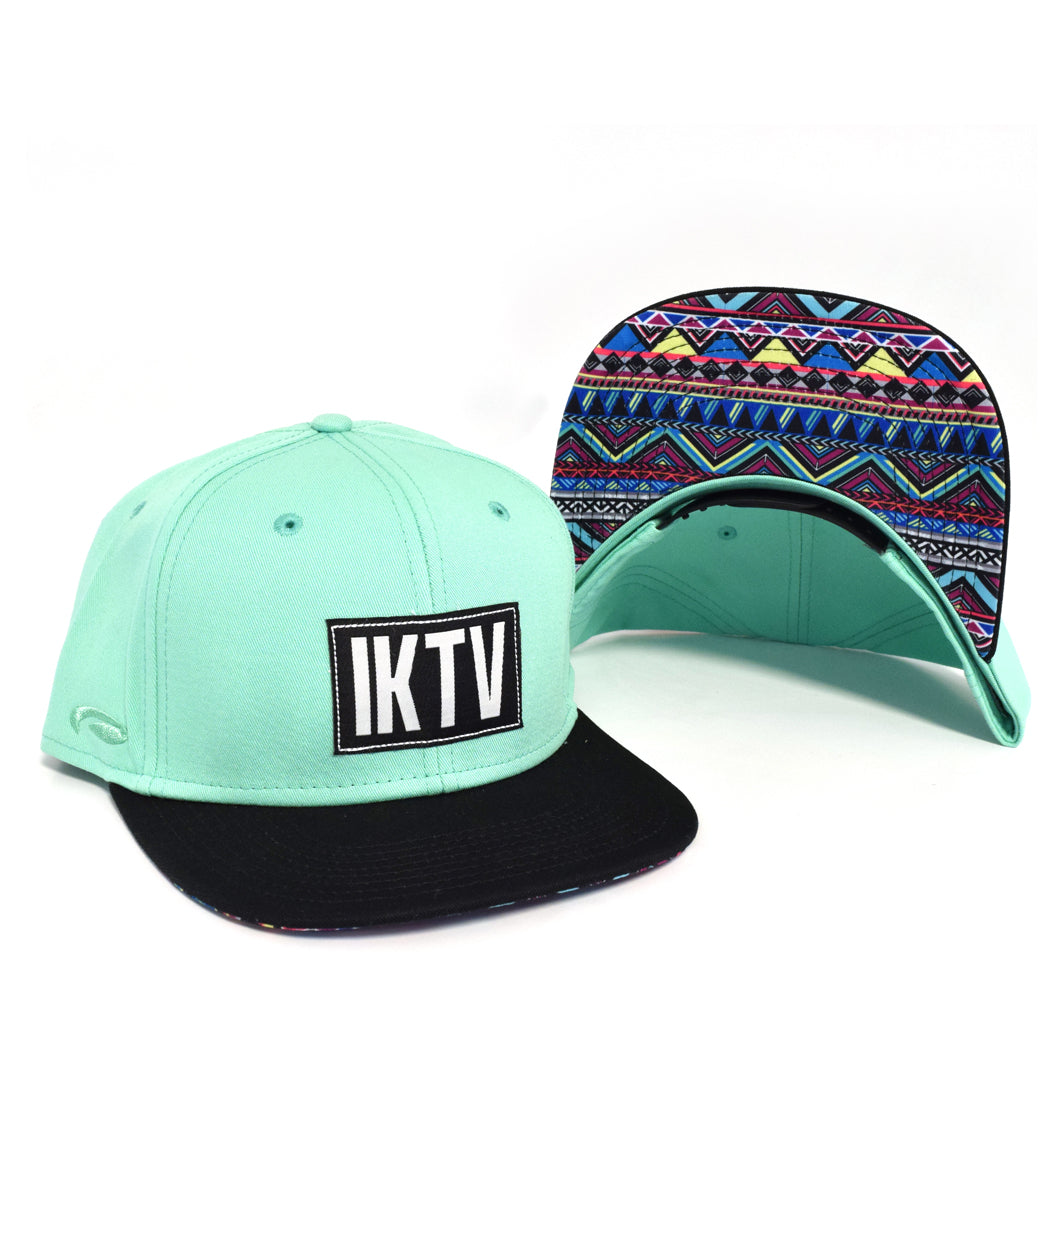 Aqua trucker hat with a black square on the front with white letters 